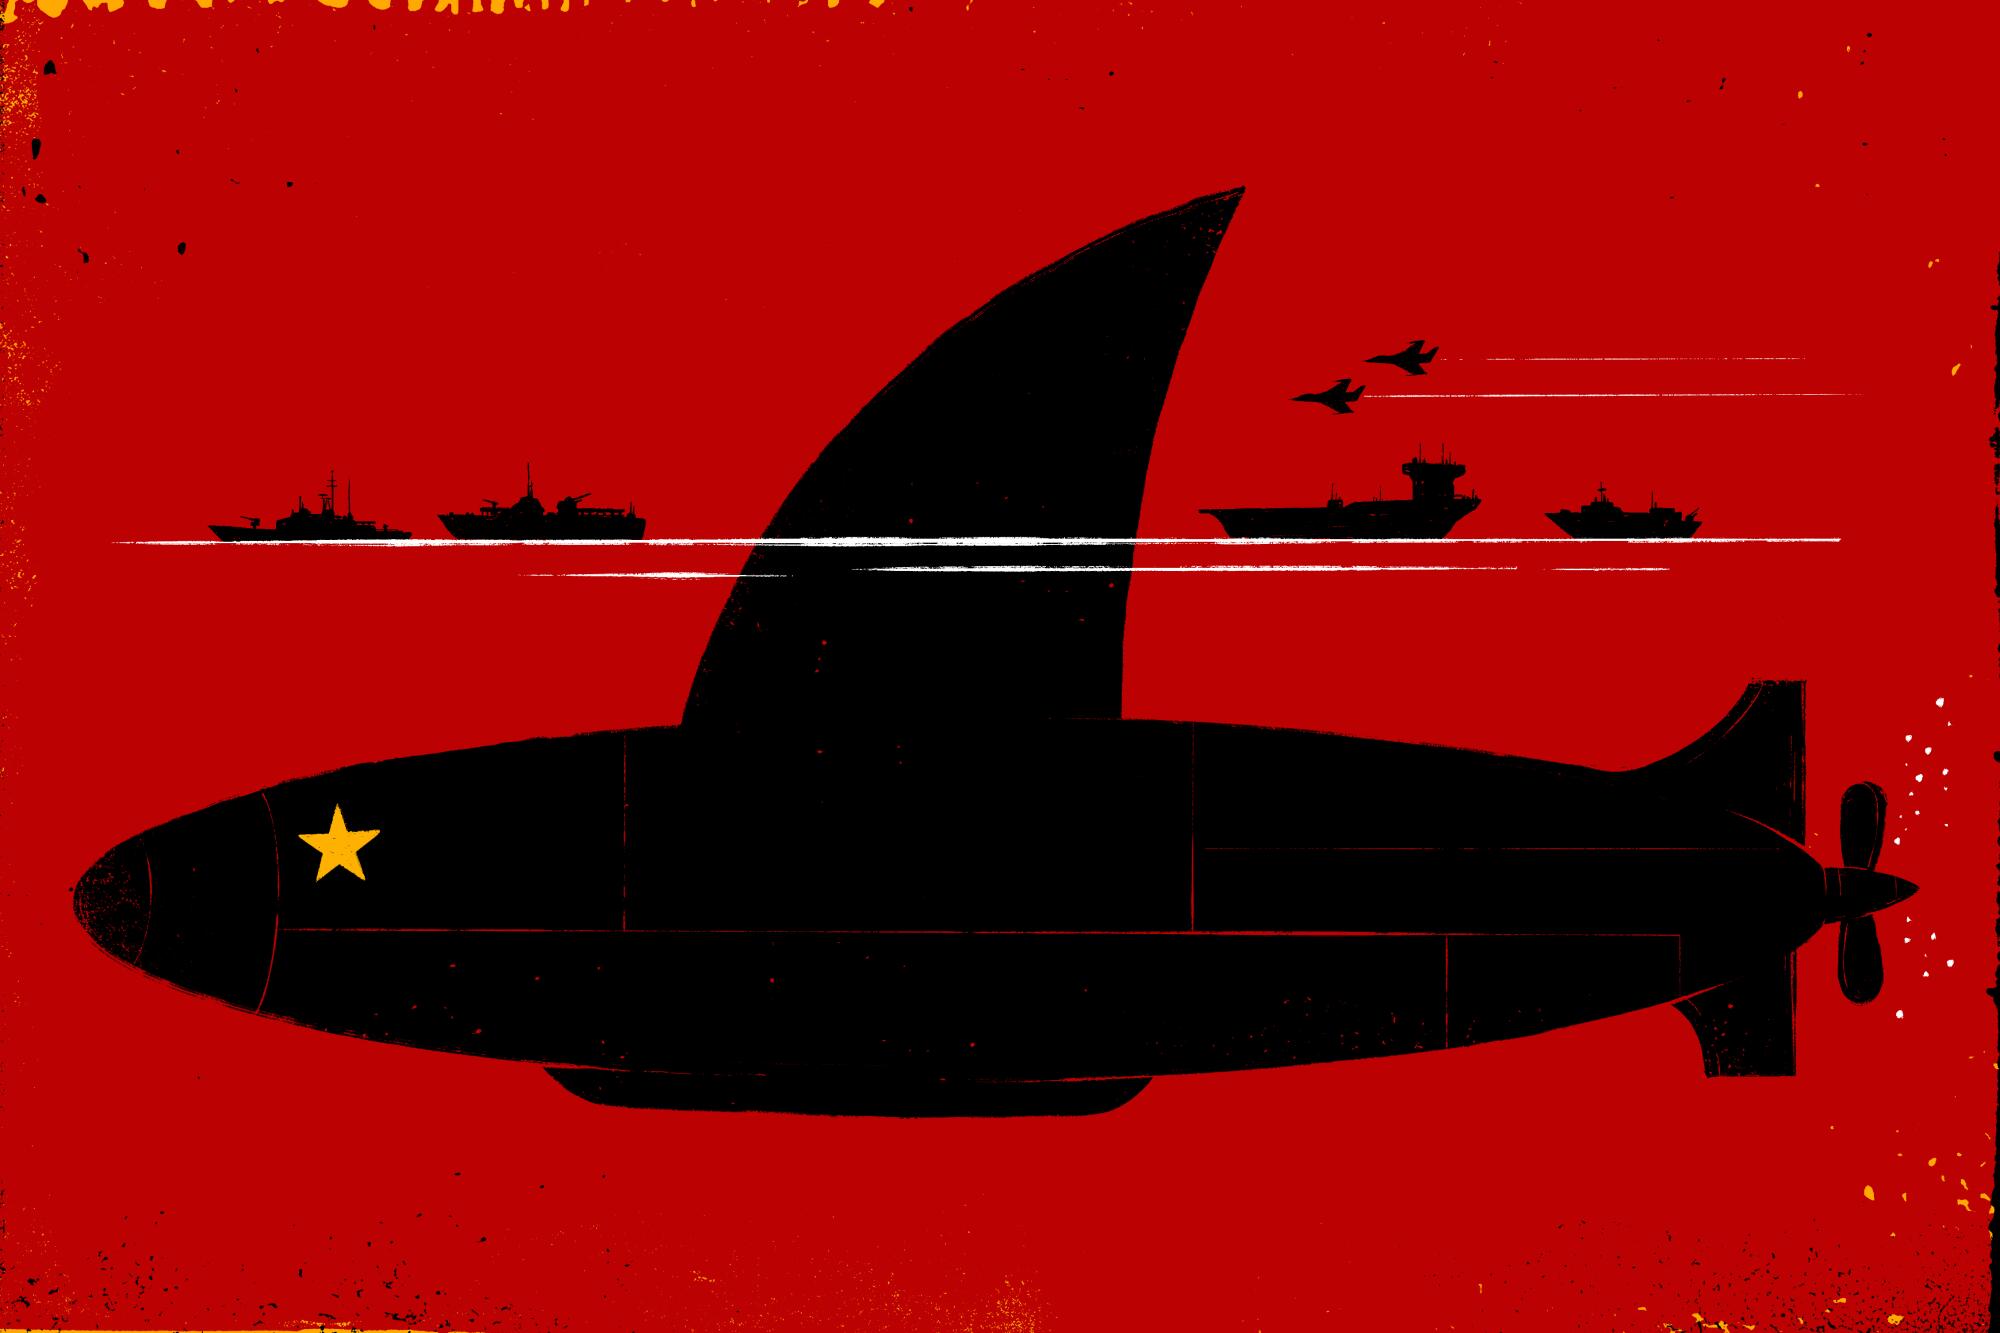 Illustration of a submarine with a yellow star and a large shark fin on a red background with warships and planes